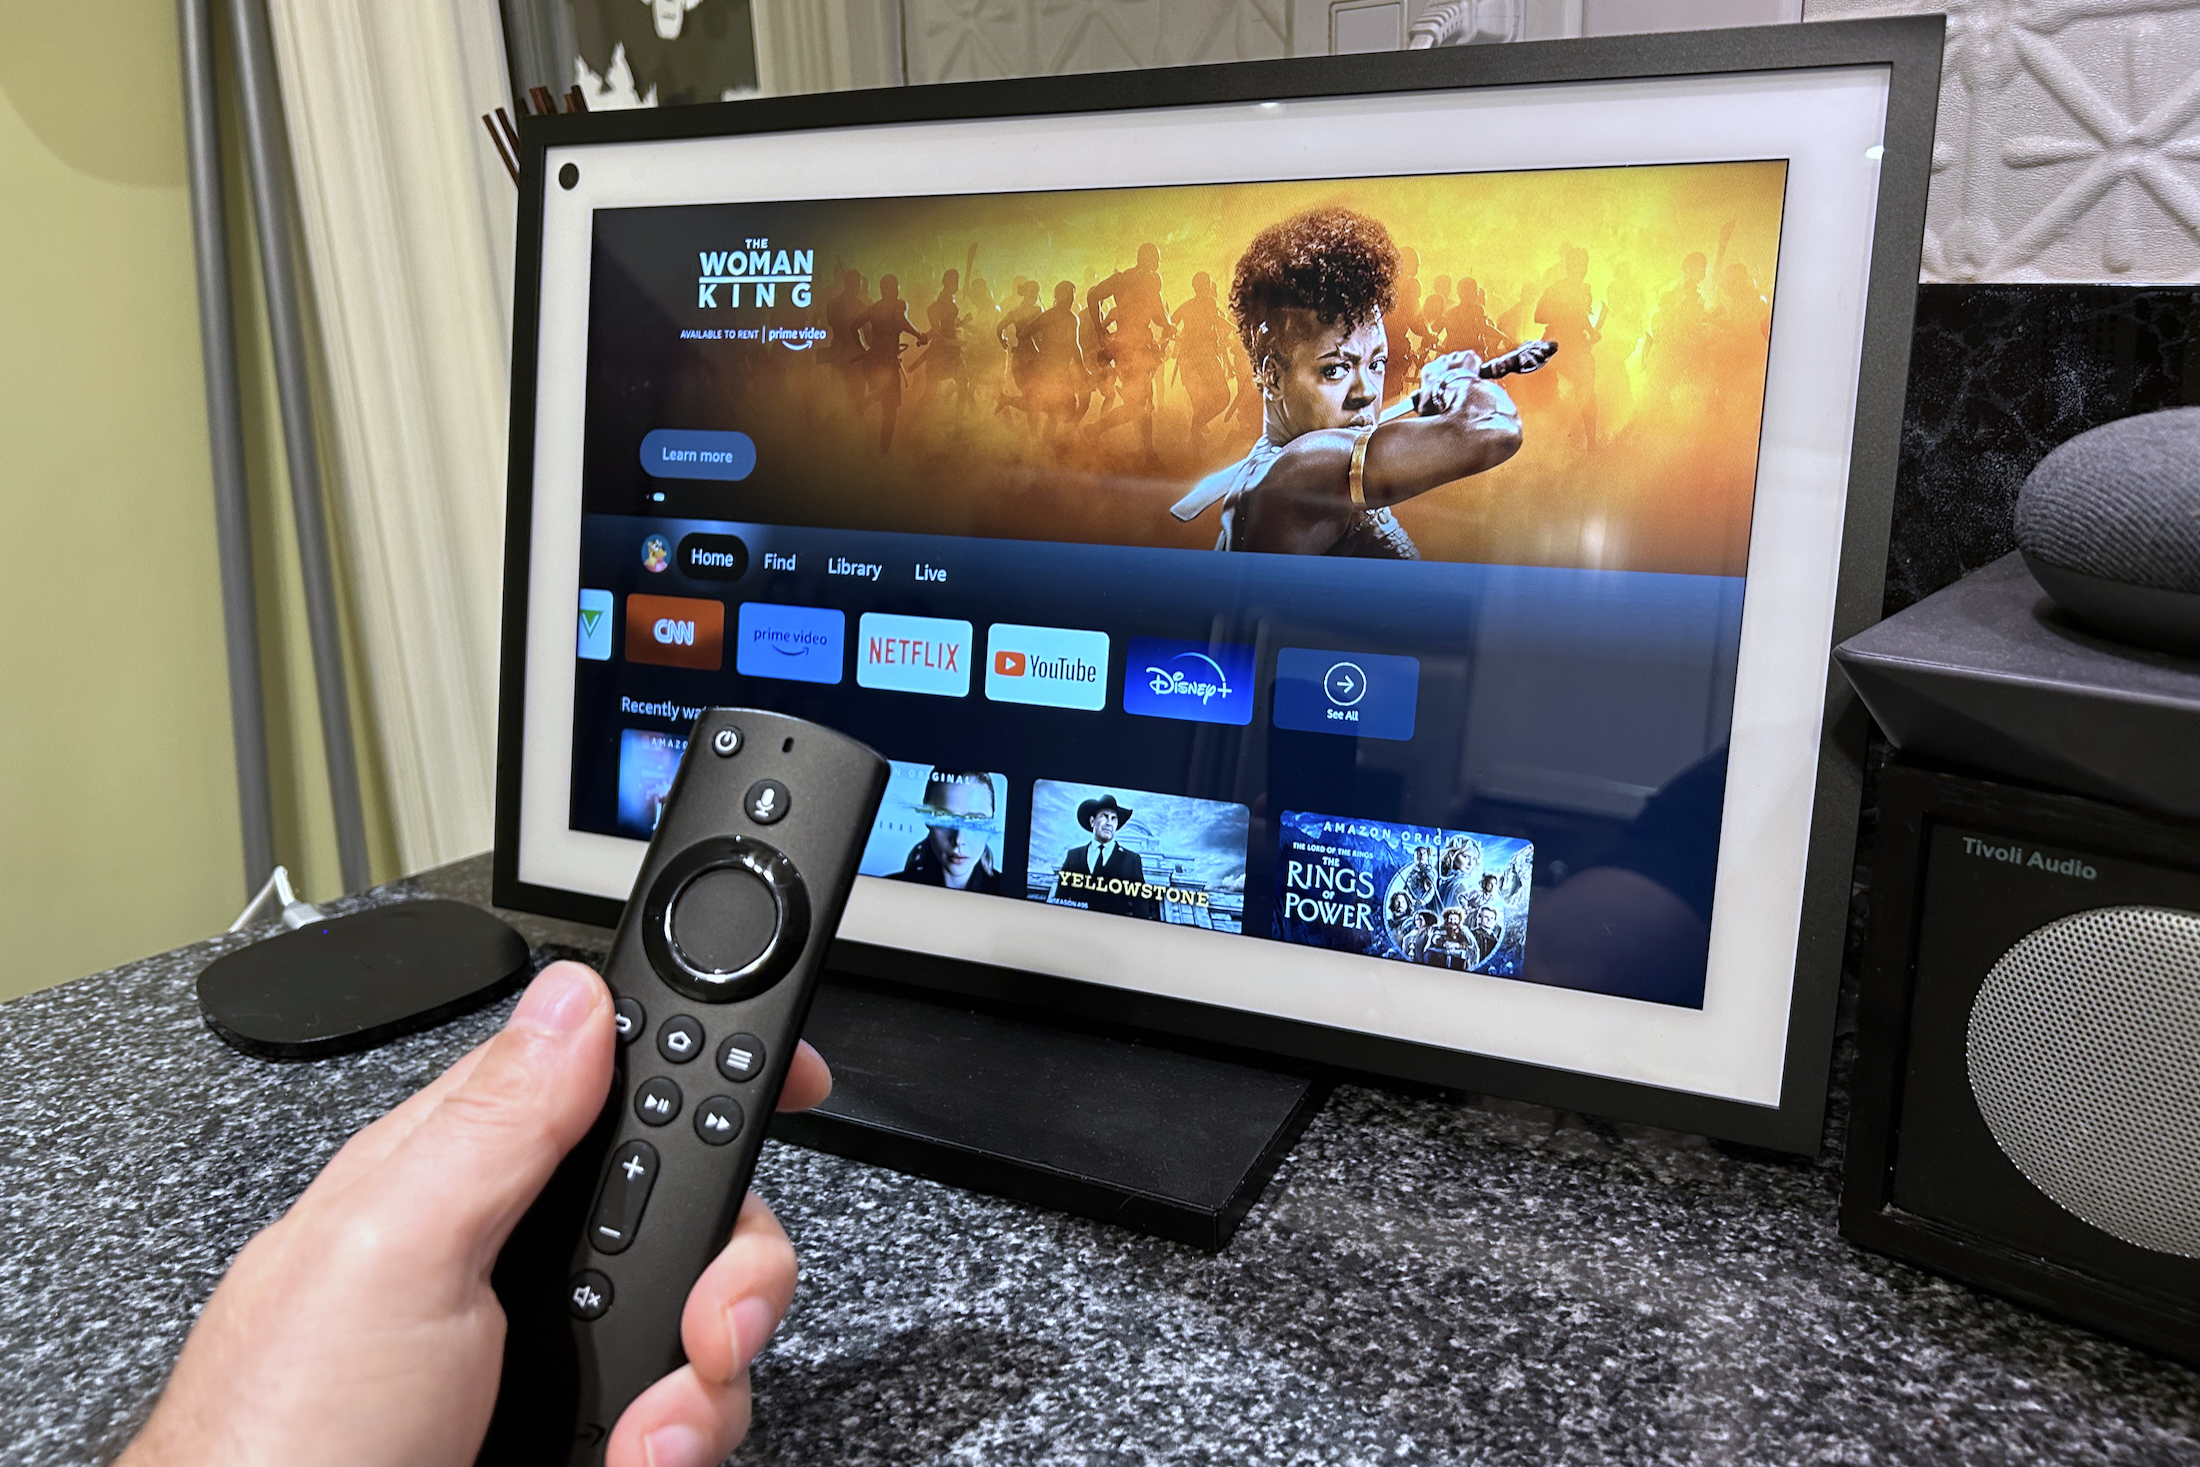 How to control your TV with Alexa: Use your Echo with a Fire TV stick